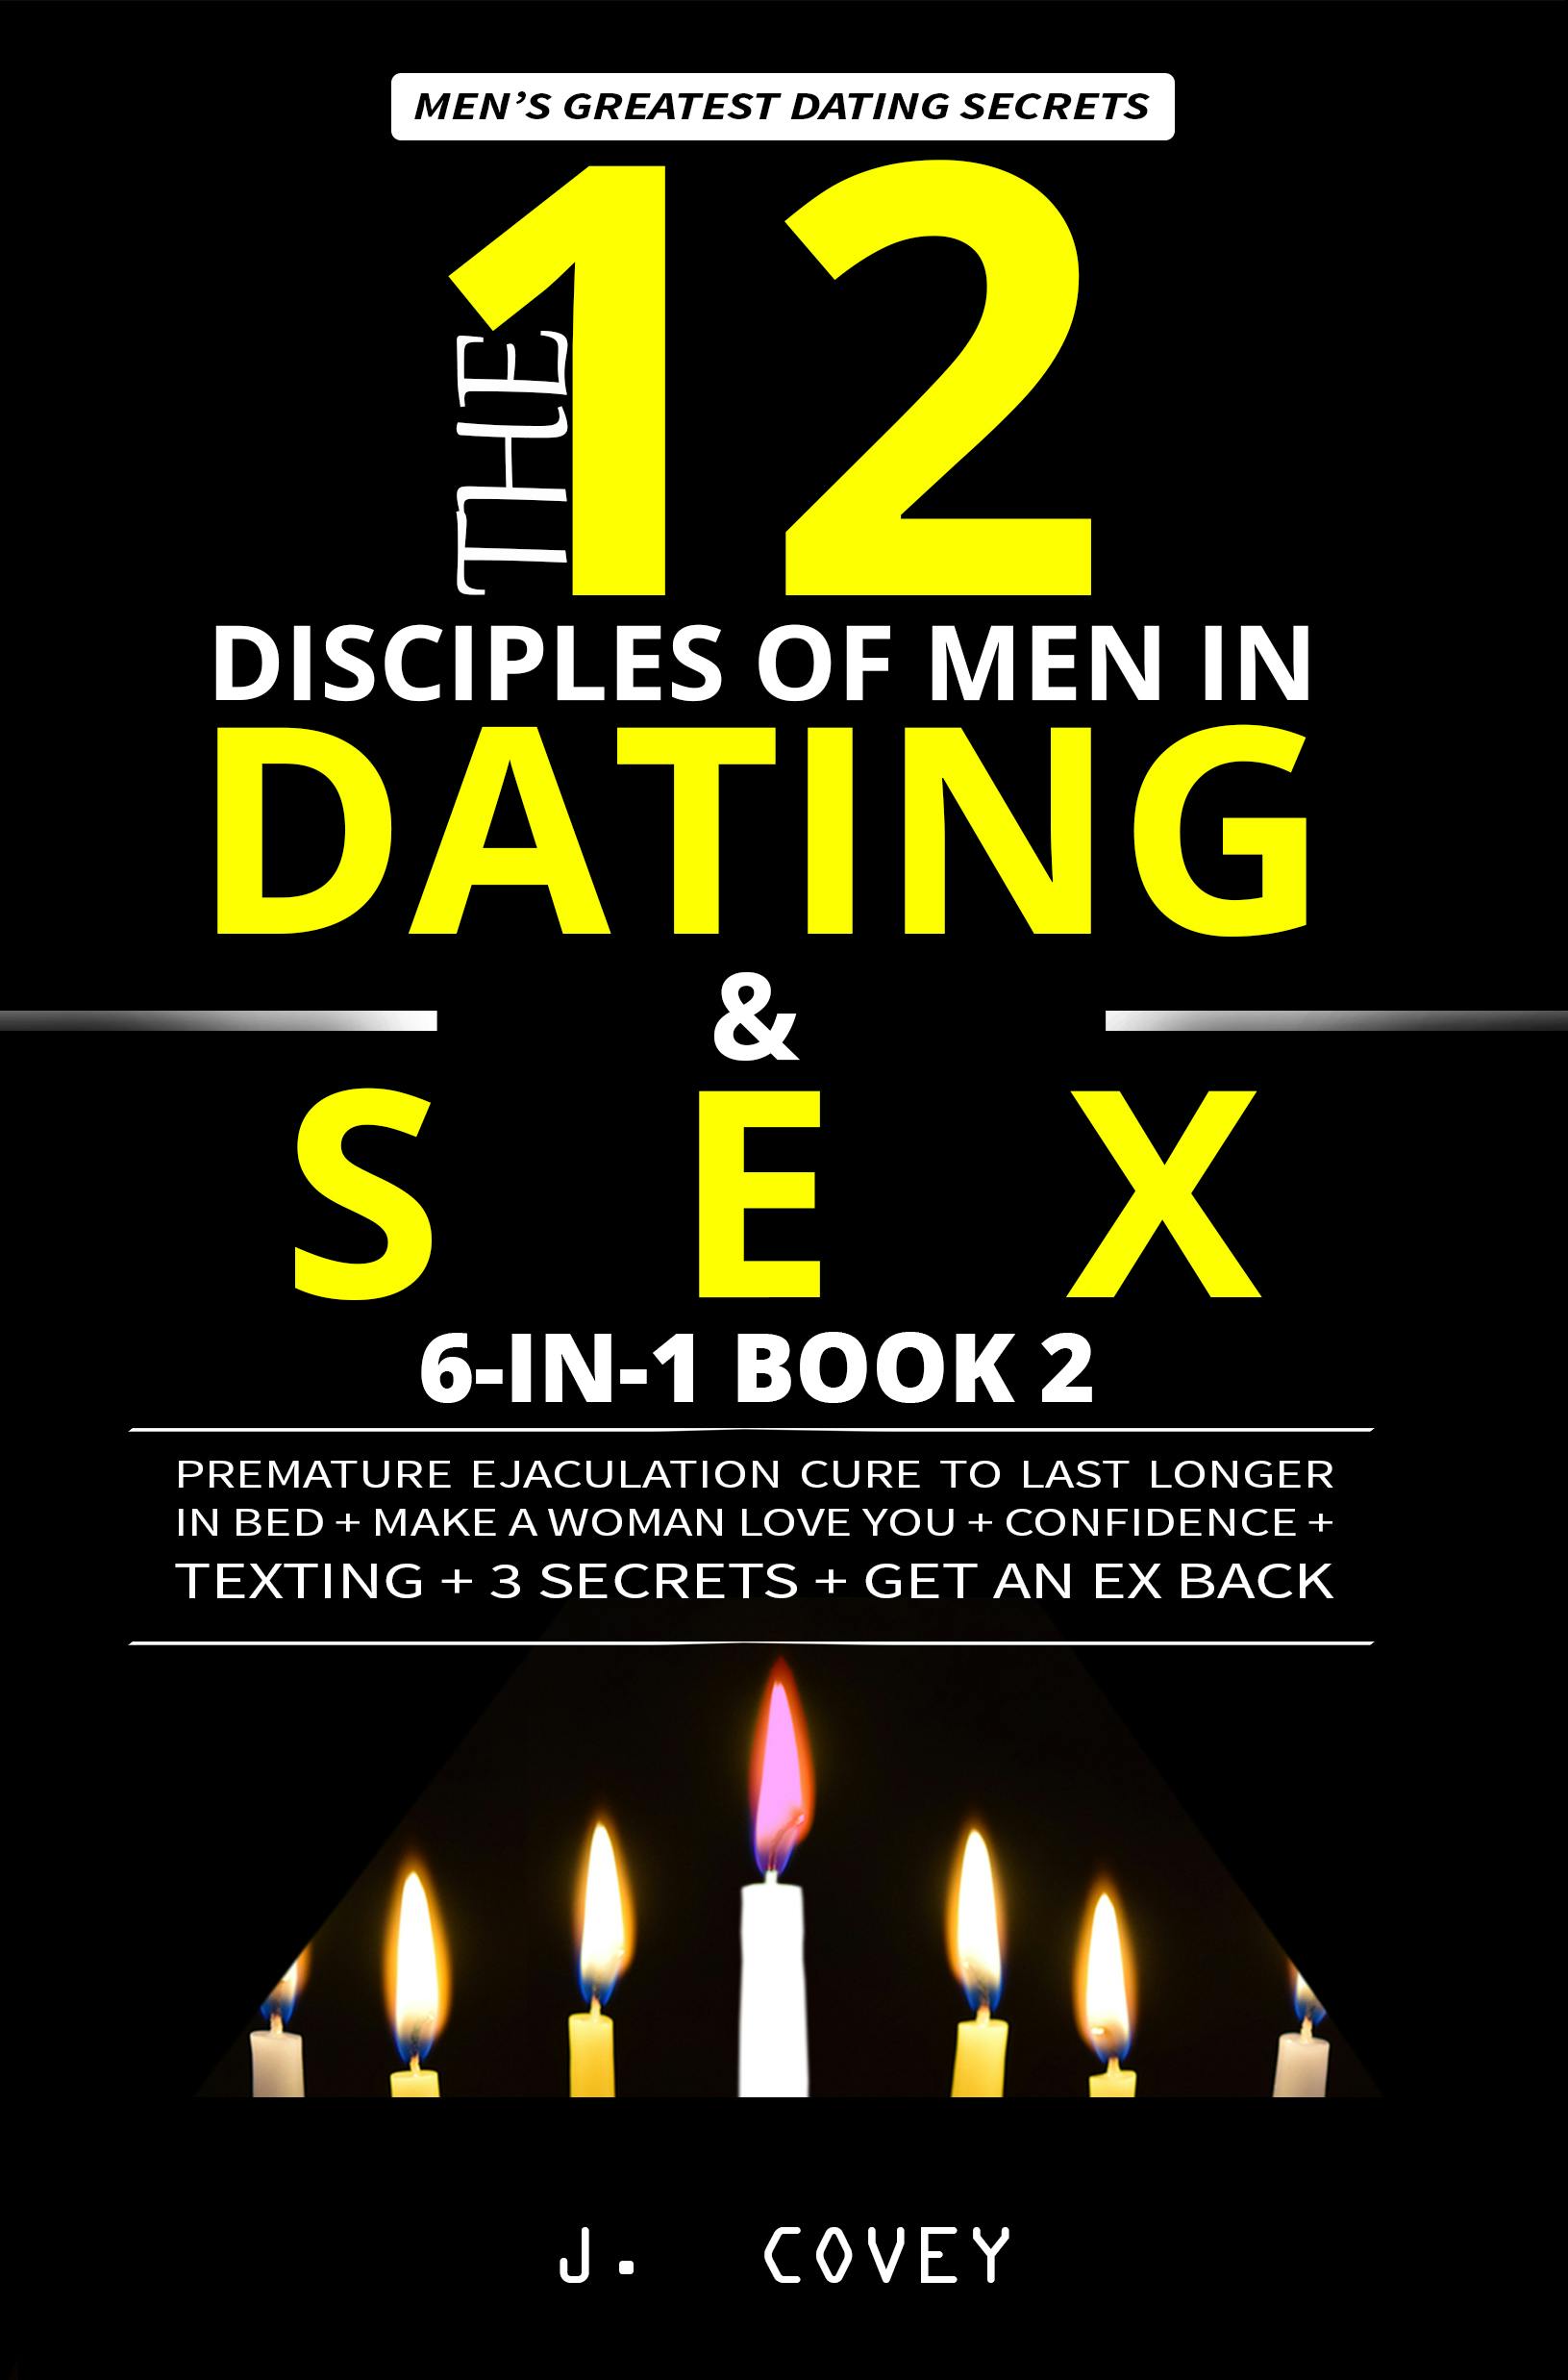 The 12 Disciples of MEN in Dating & SEX - undefined